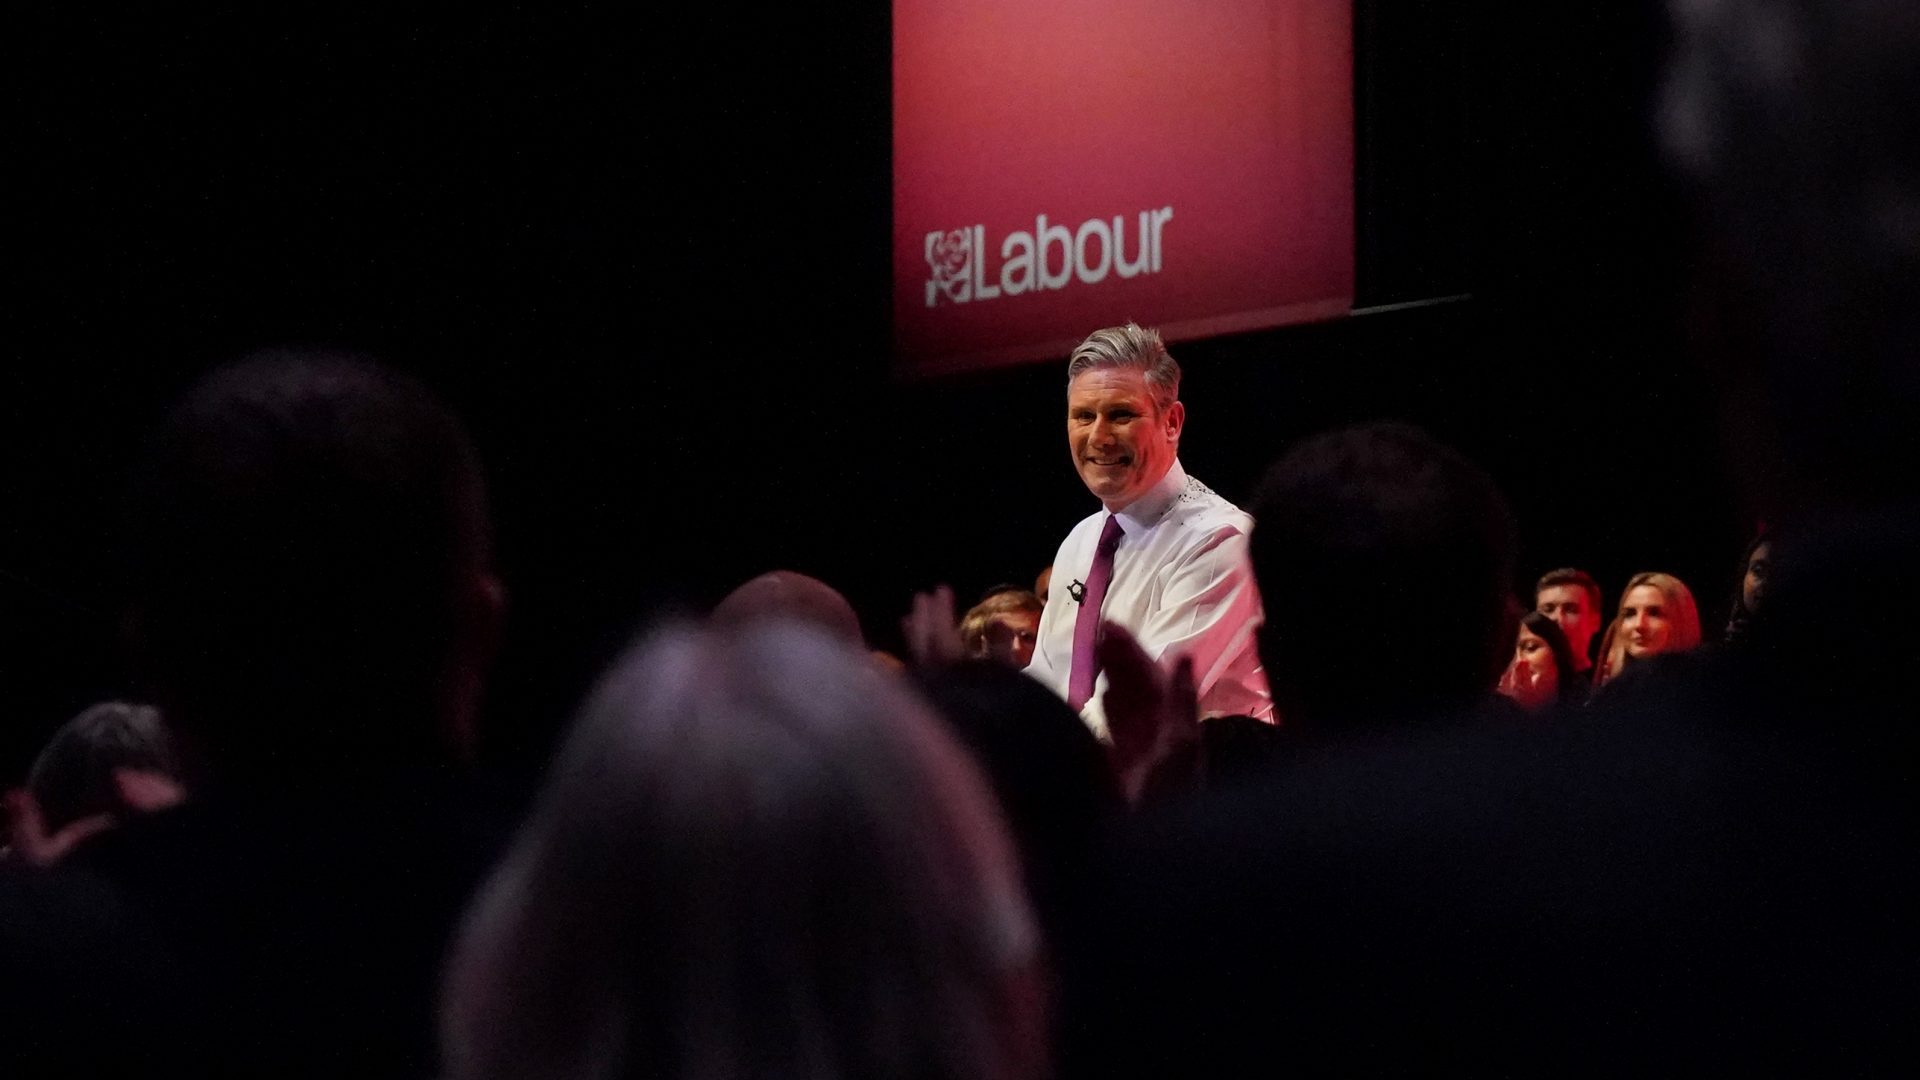  Labour party leader, Sir Keir Starmer delivers the leader's speech, covered in glitter after a protestor stormed the stage on the third day of the Labour Party conference. Photo:  Ian Forsyth/Getty Images